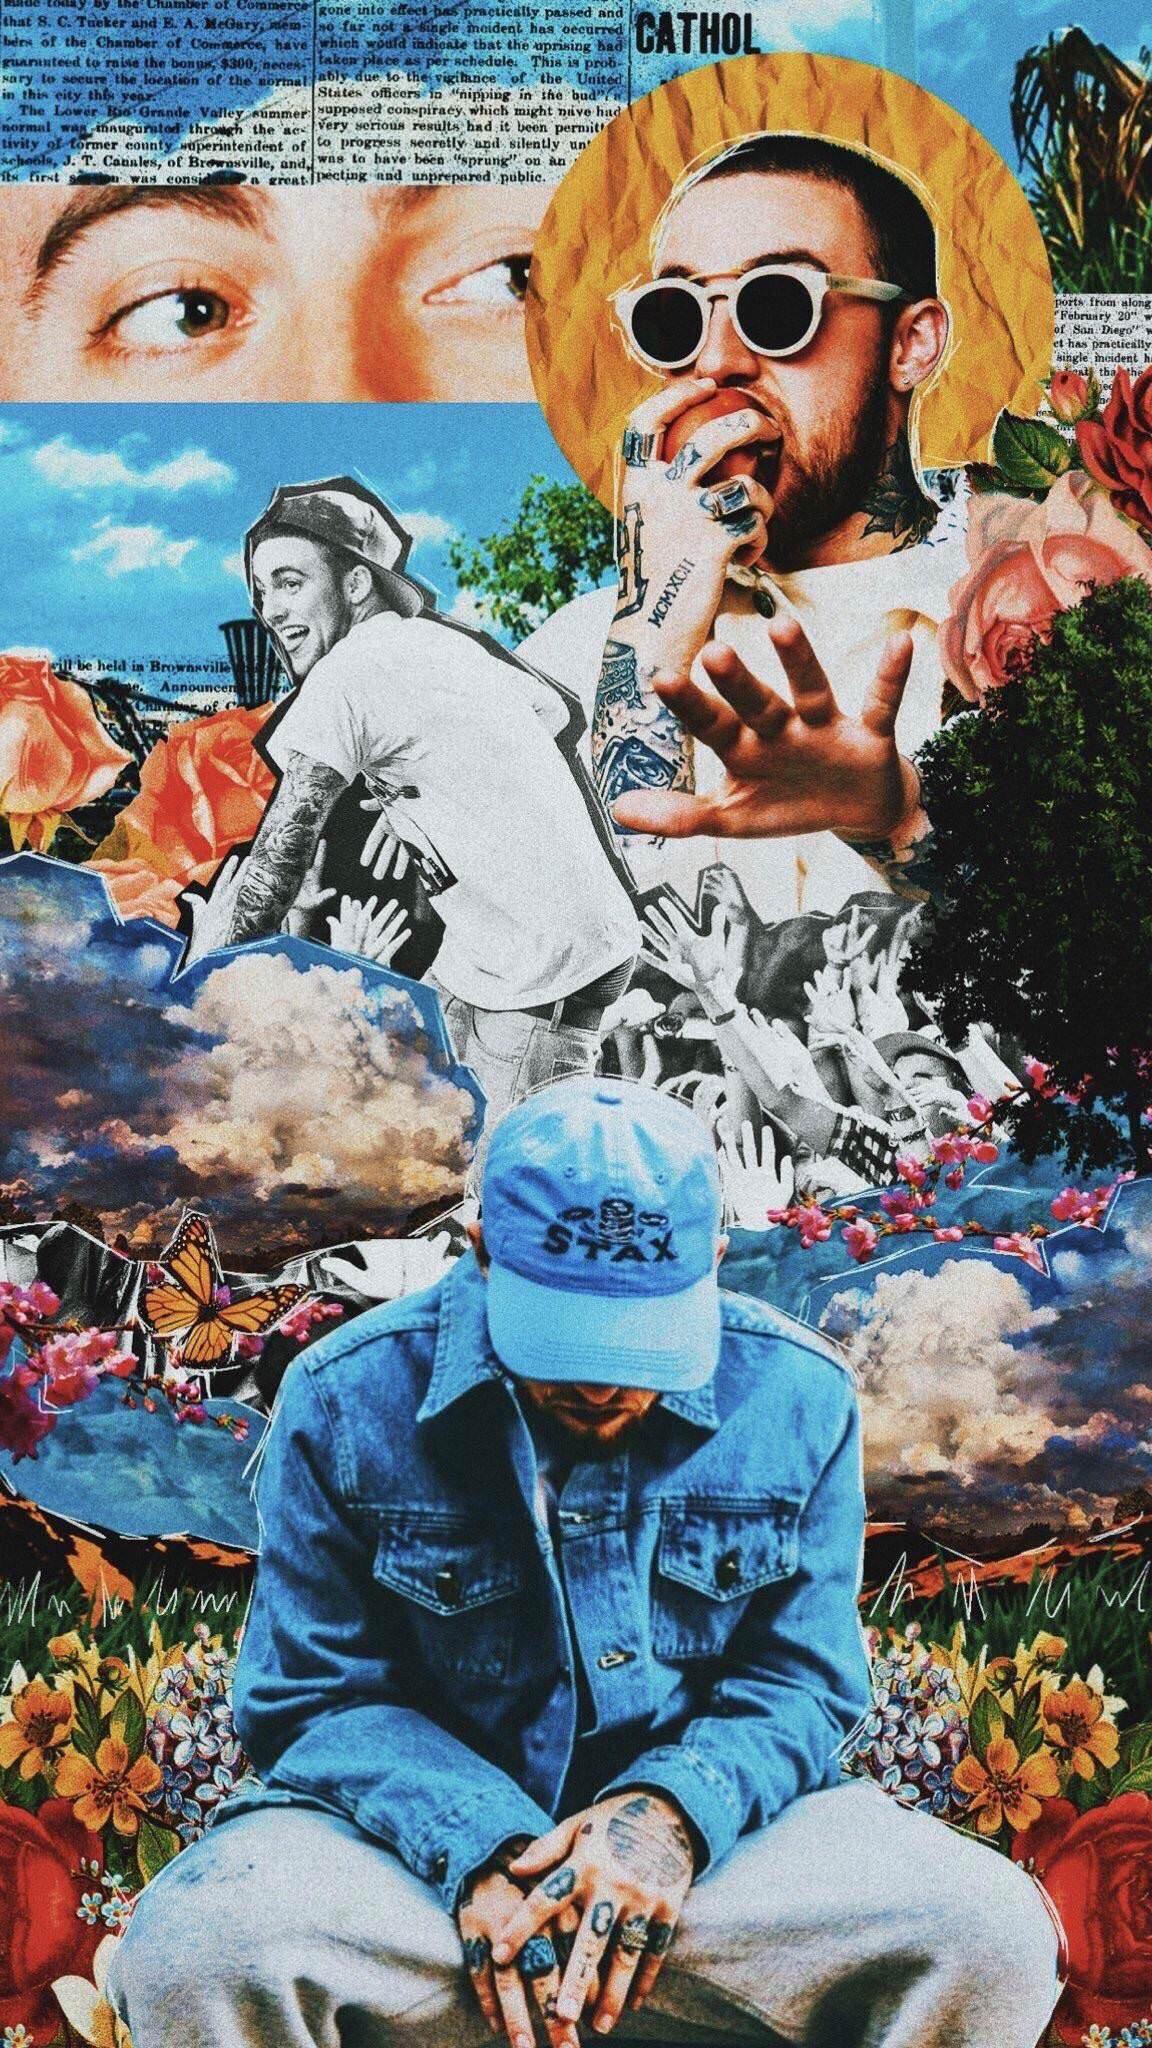 iPhone wallpaper in the MacMiller community